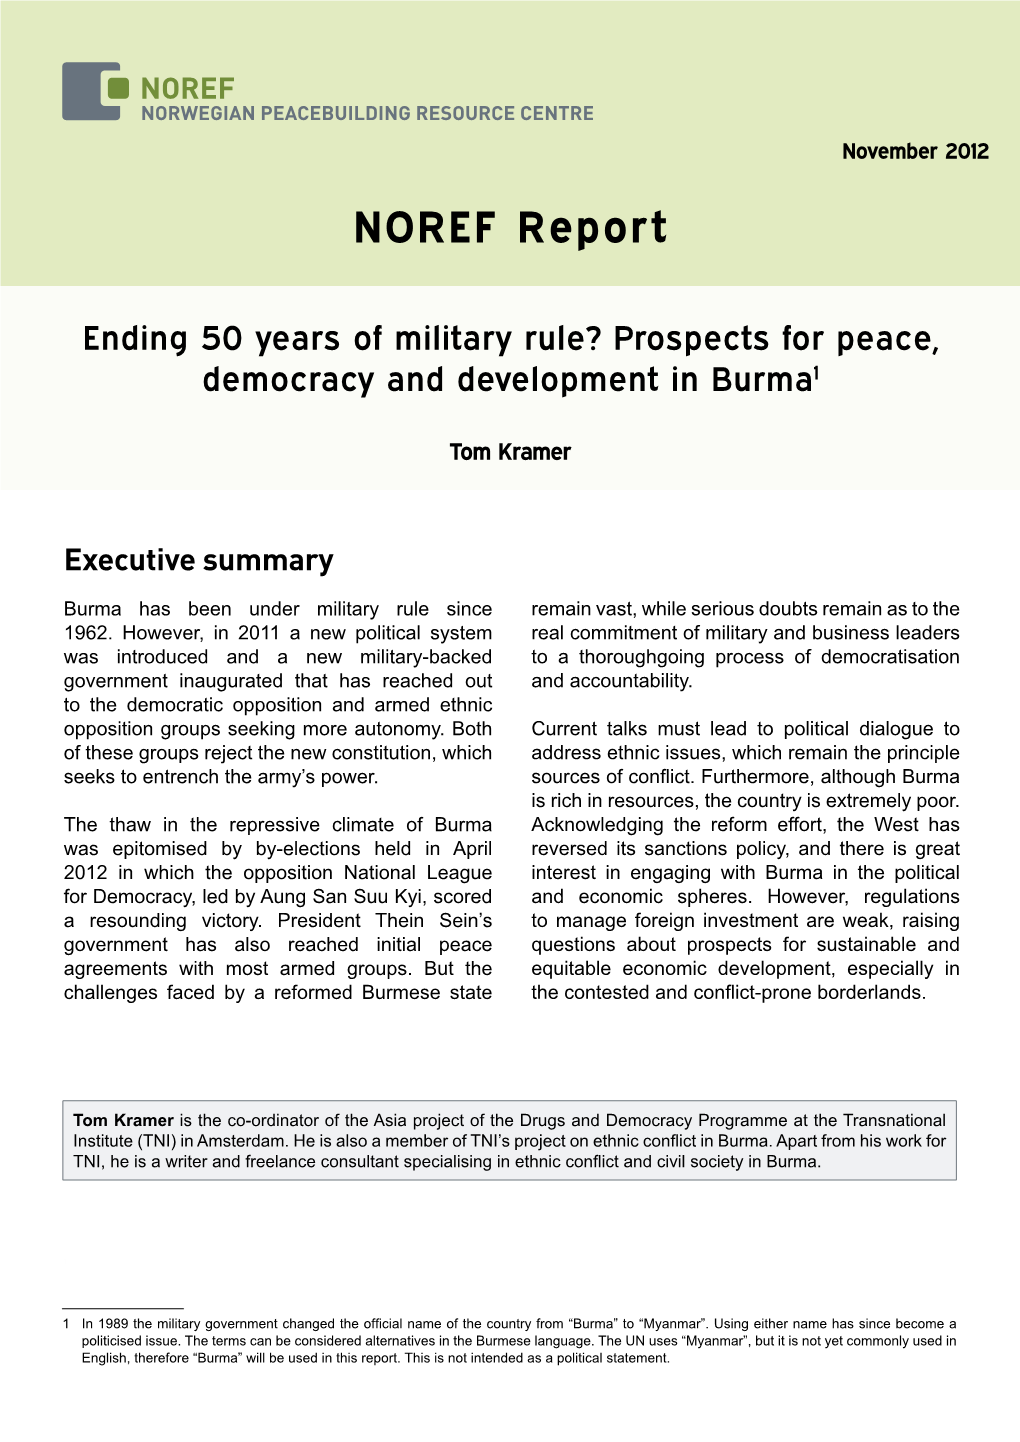 Ending 50 Years of Military Rule? Prospects for Peace, Democracy and Development in Burma1